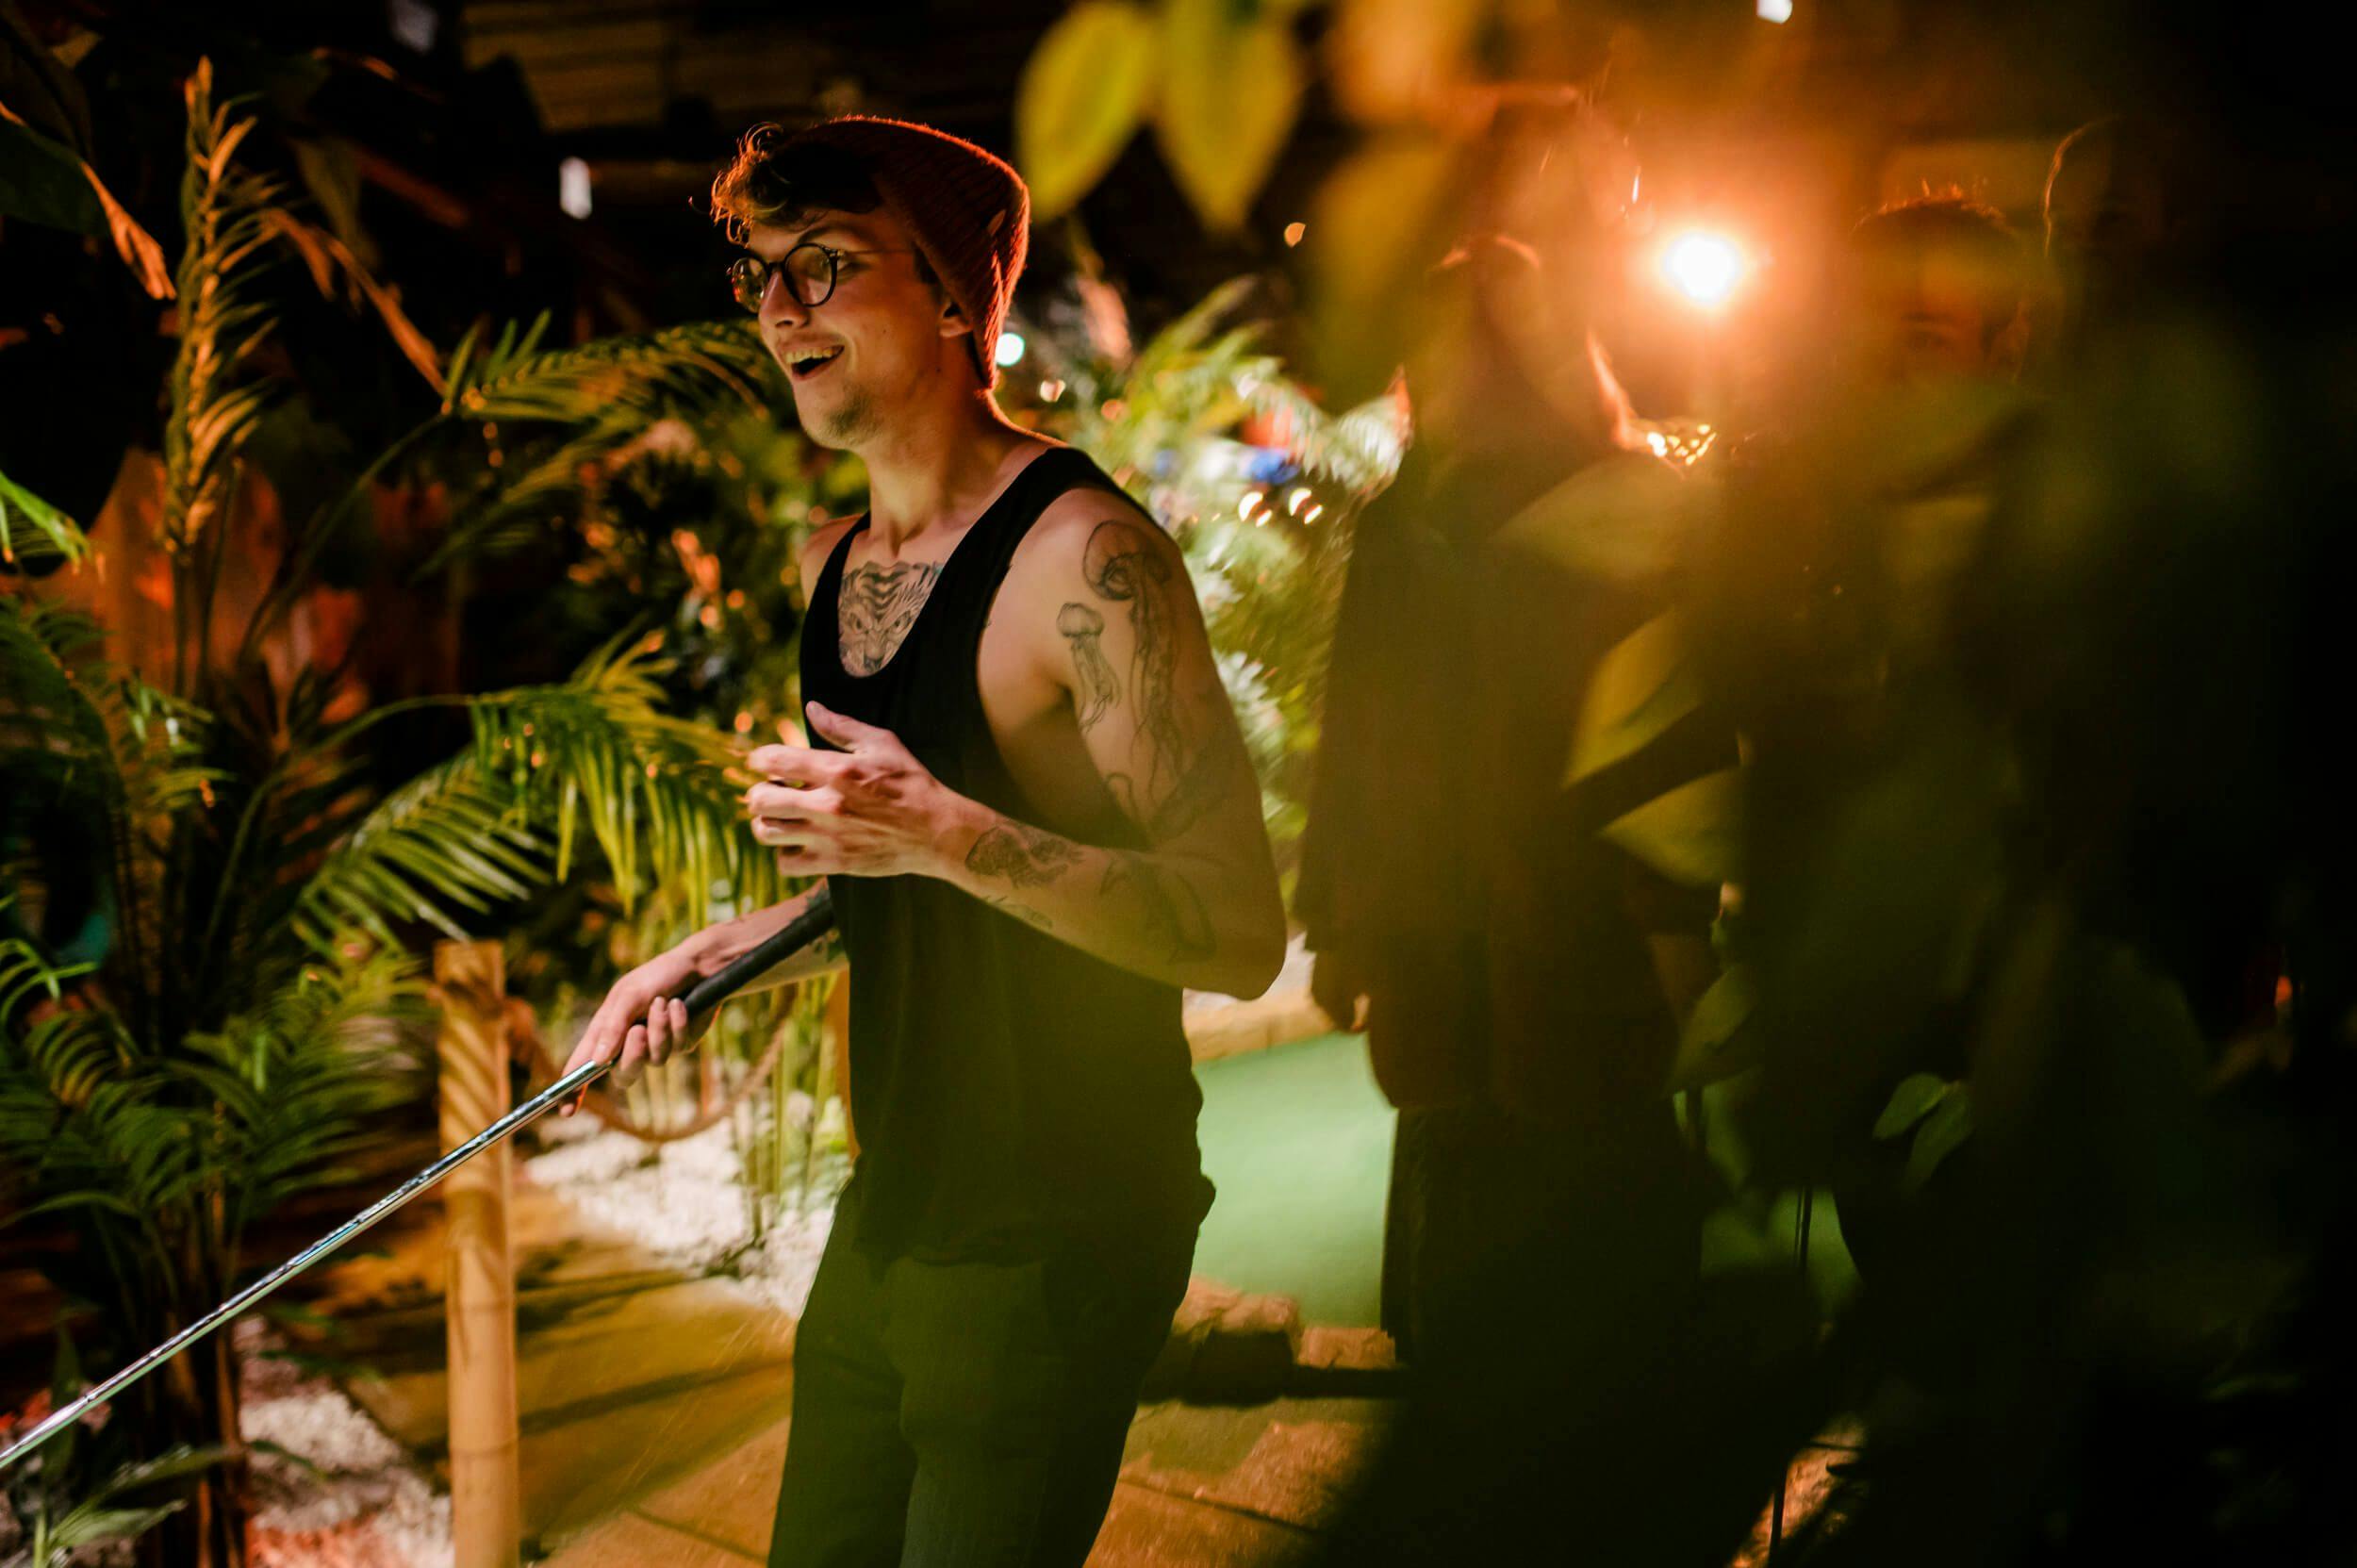 Image of a man in a black vest wearing a beanie, glasses and covered in arm tattoos walking through the Treetop jungle holding a mini golf club while his friends trail behind.  